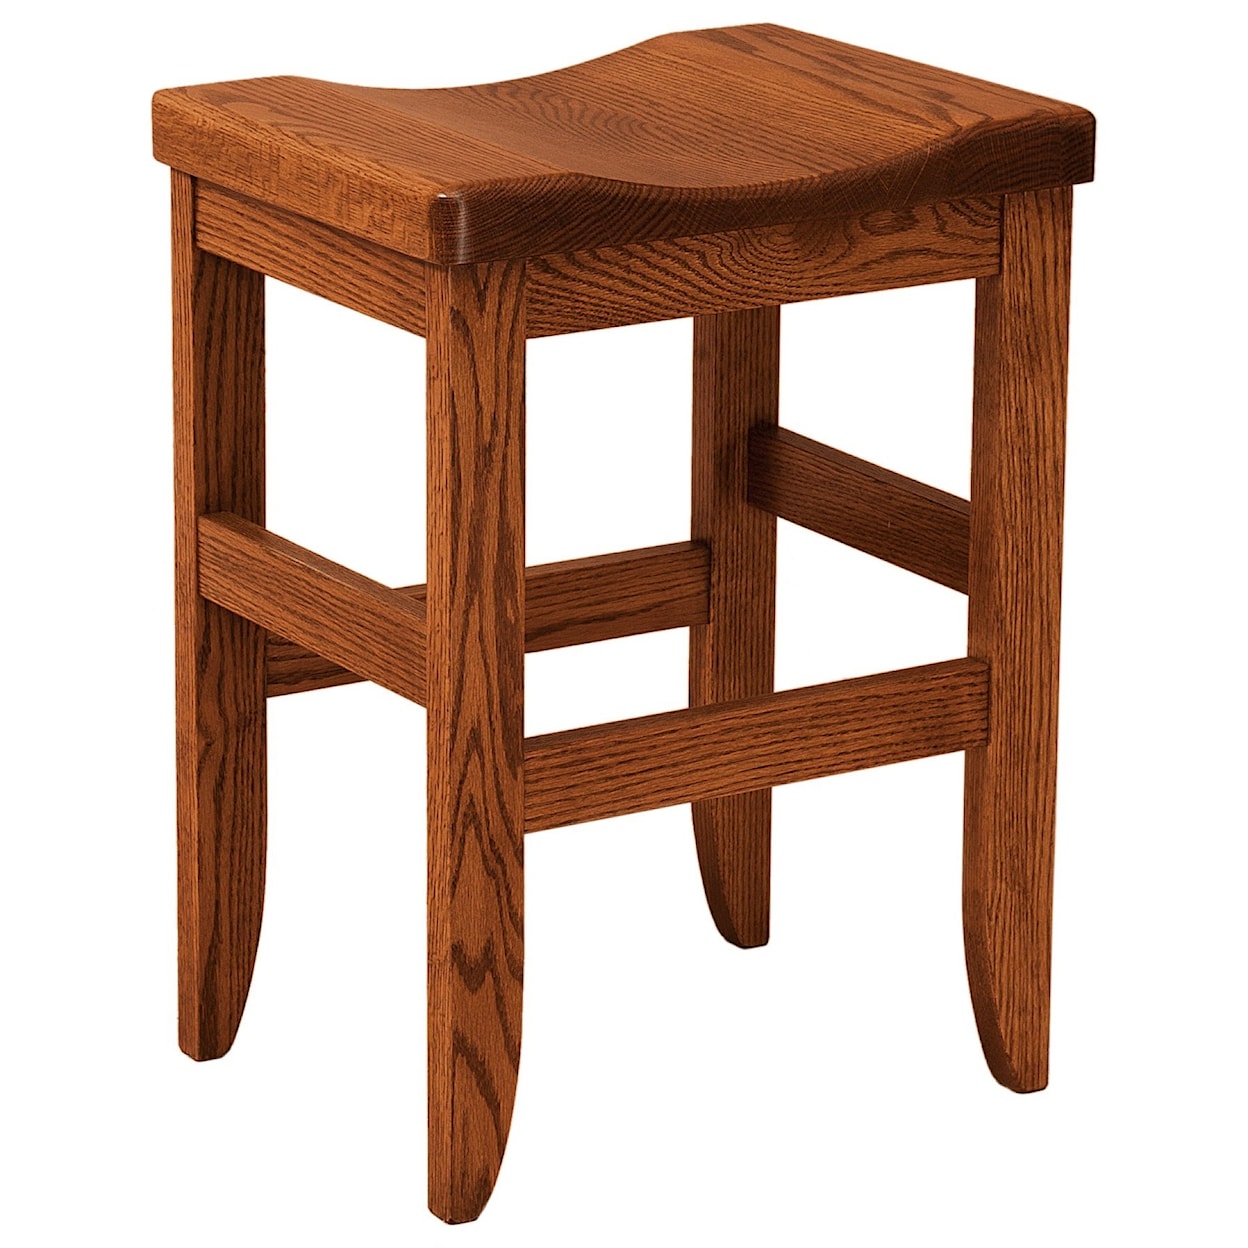 F&N Woodworking Clifton Bar Stool 24" Height - Fabric Seat